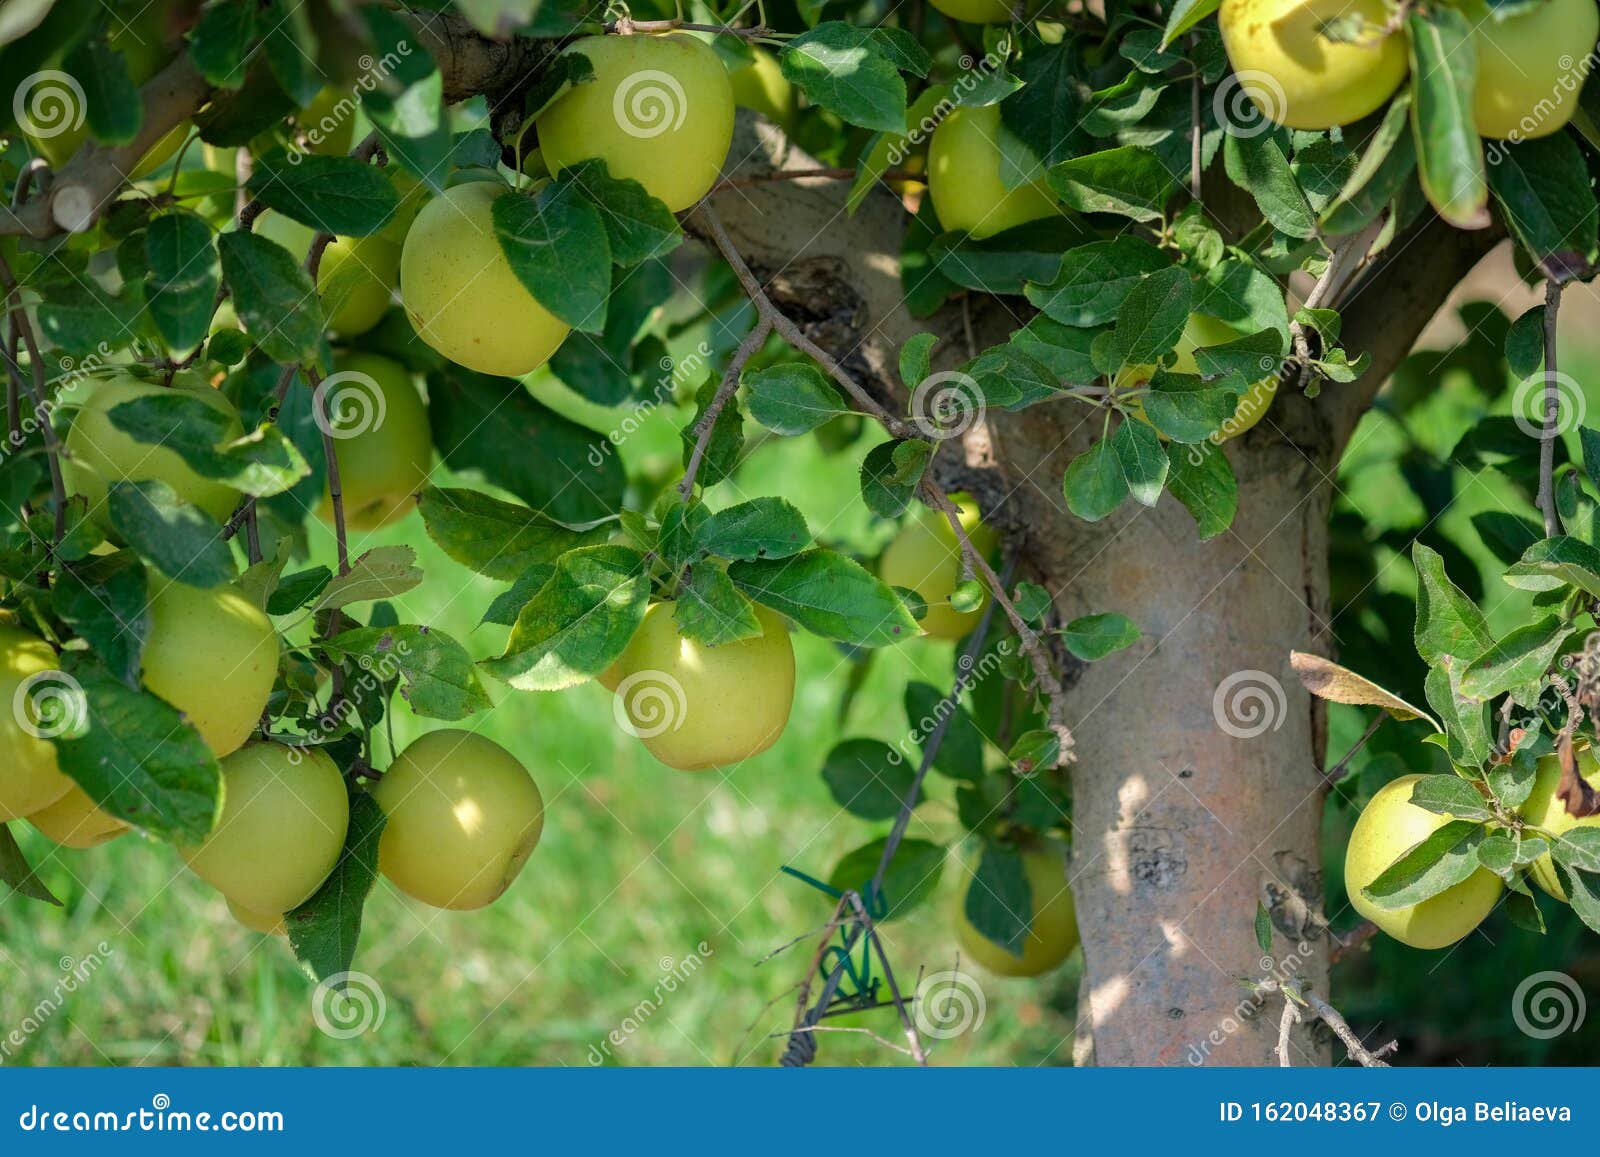 golden delicious apple tree with many ripe fruits on sunny day